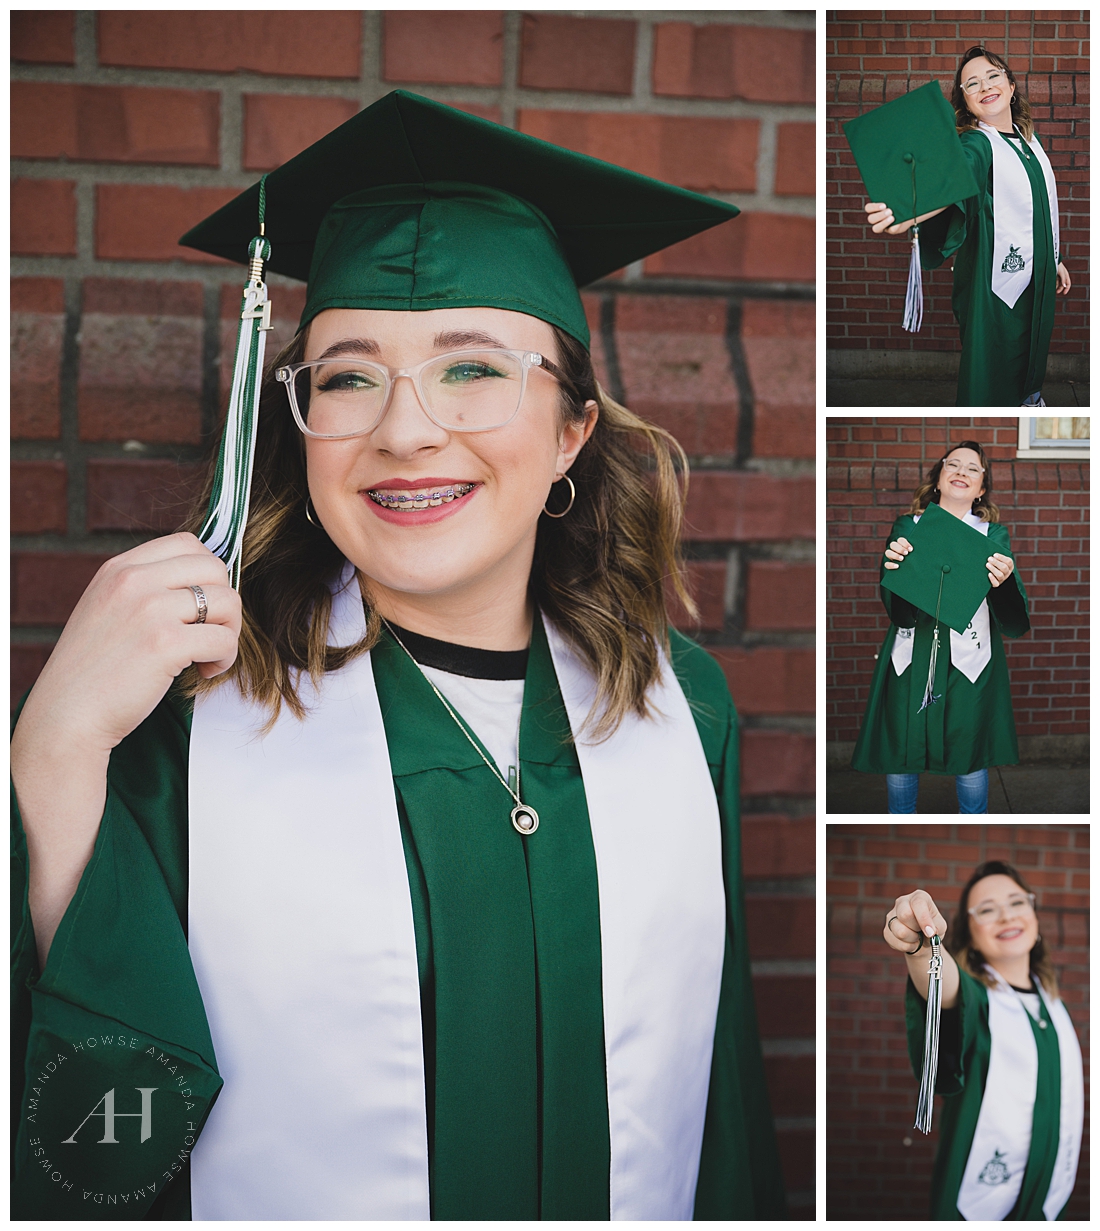 Cap and Gown Senior Portraits | How to Style Hair and Makeup for Graduation Portraits, Senior Style Ideas | Photographed by the Best Tacoma Senior Photographer Amanda Howse Photography